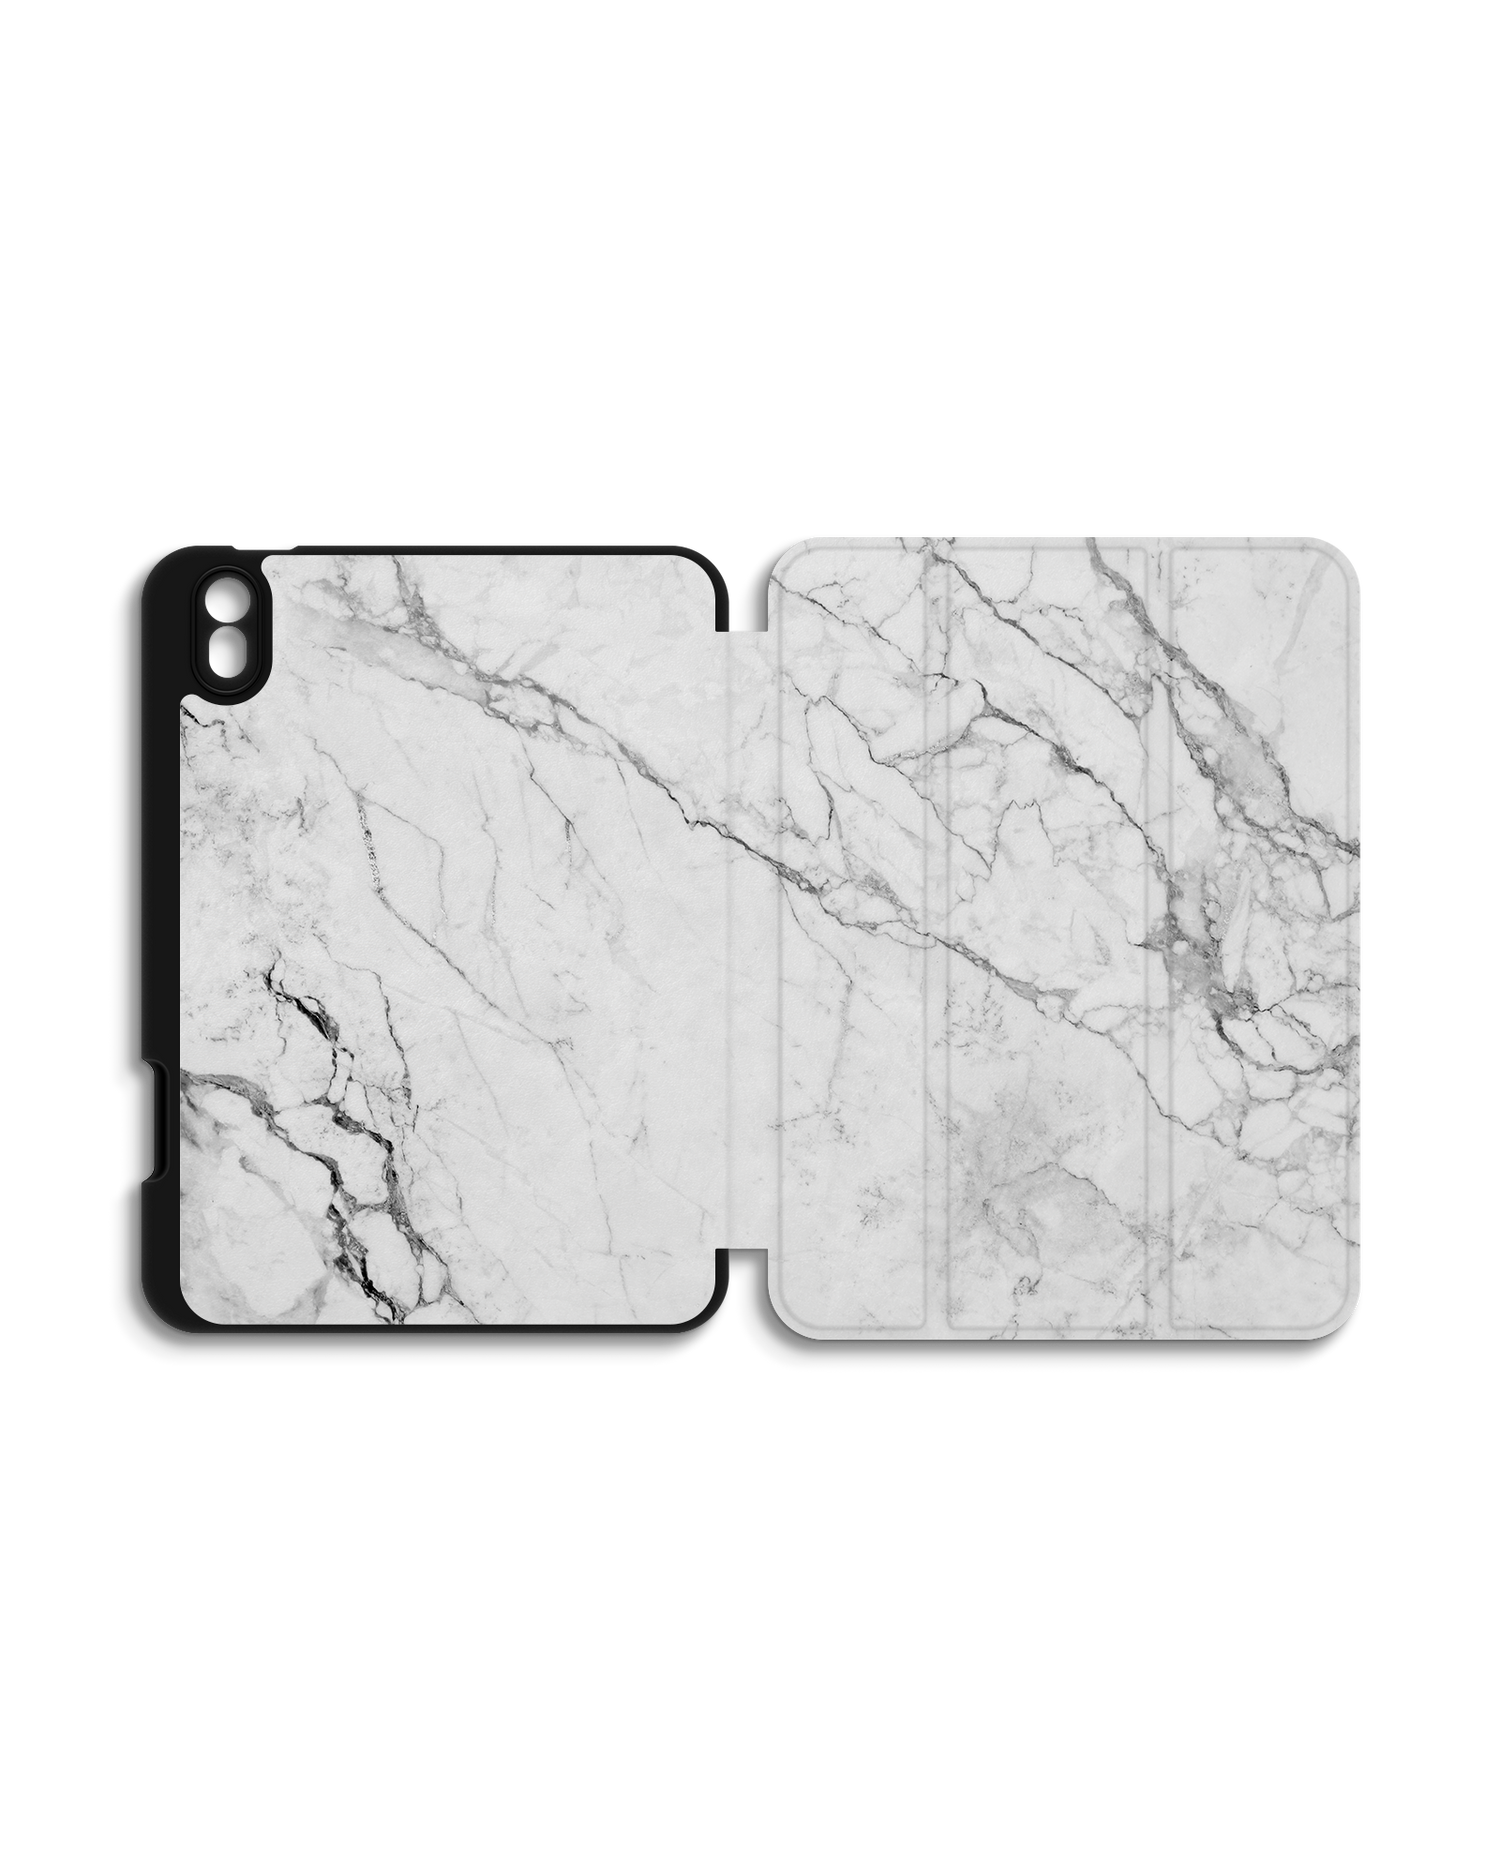 White Marble iPad Case with Pencil Holder Apple iPad mini 6 (2021): Opened exterior view